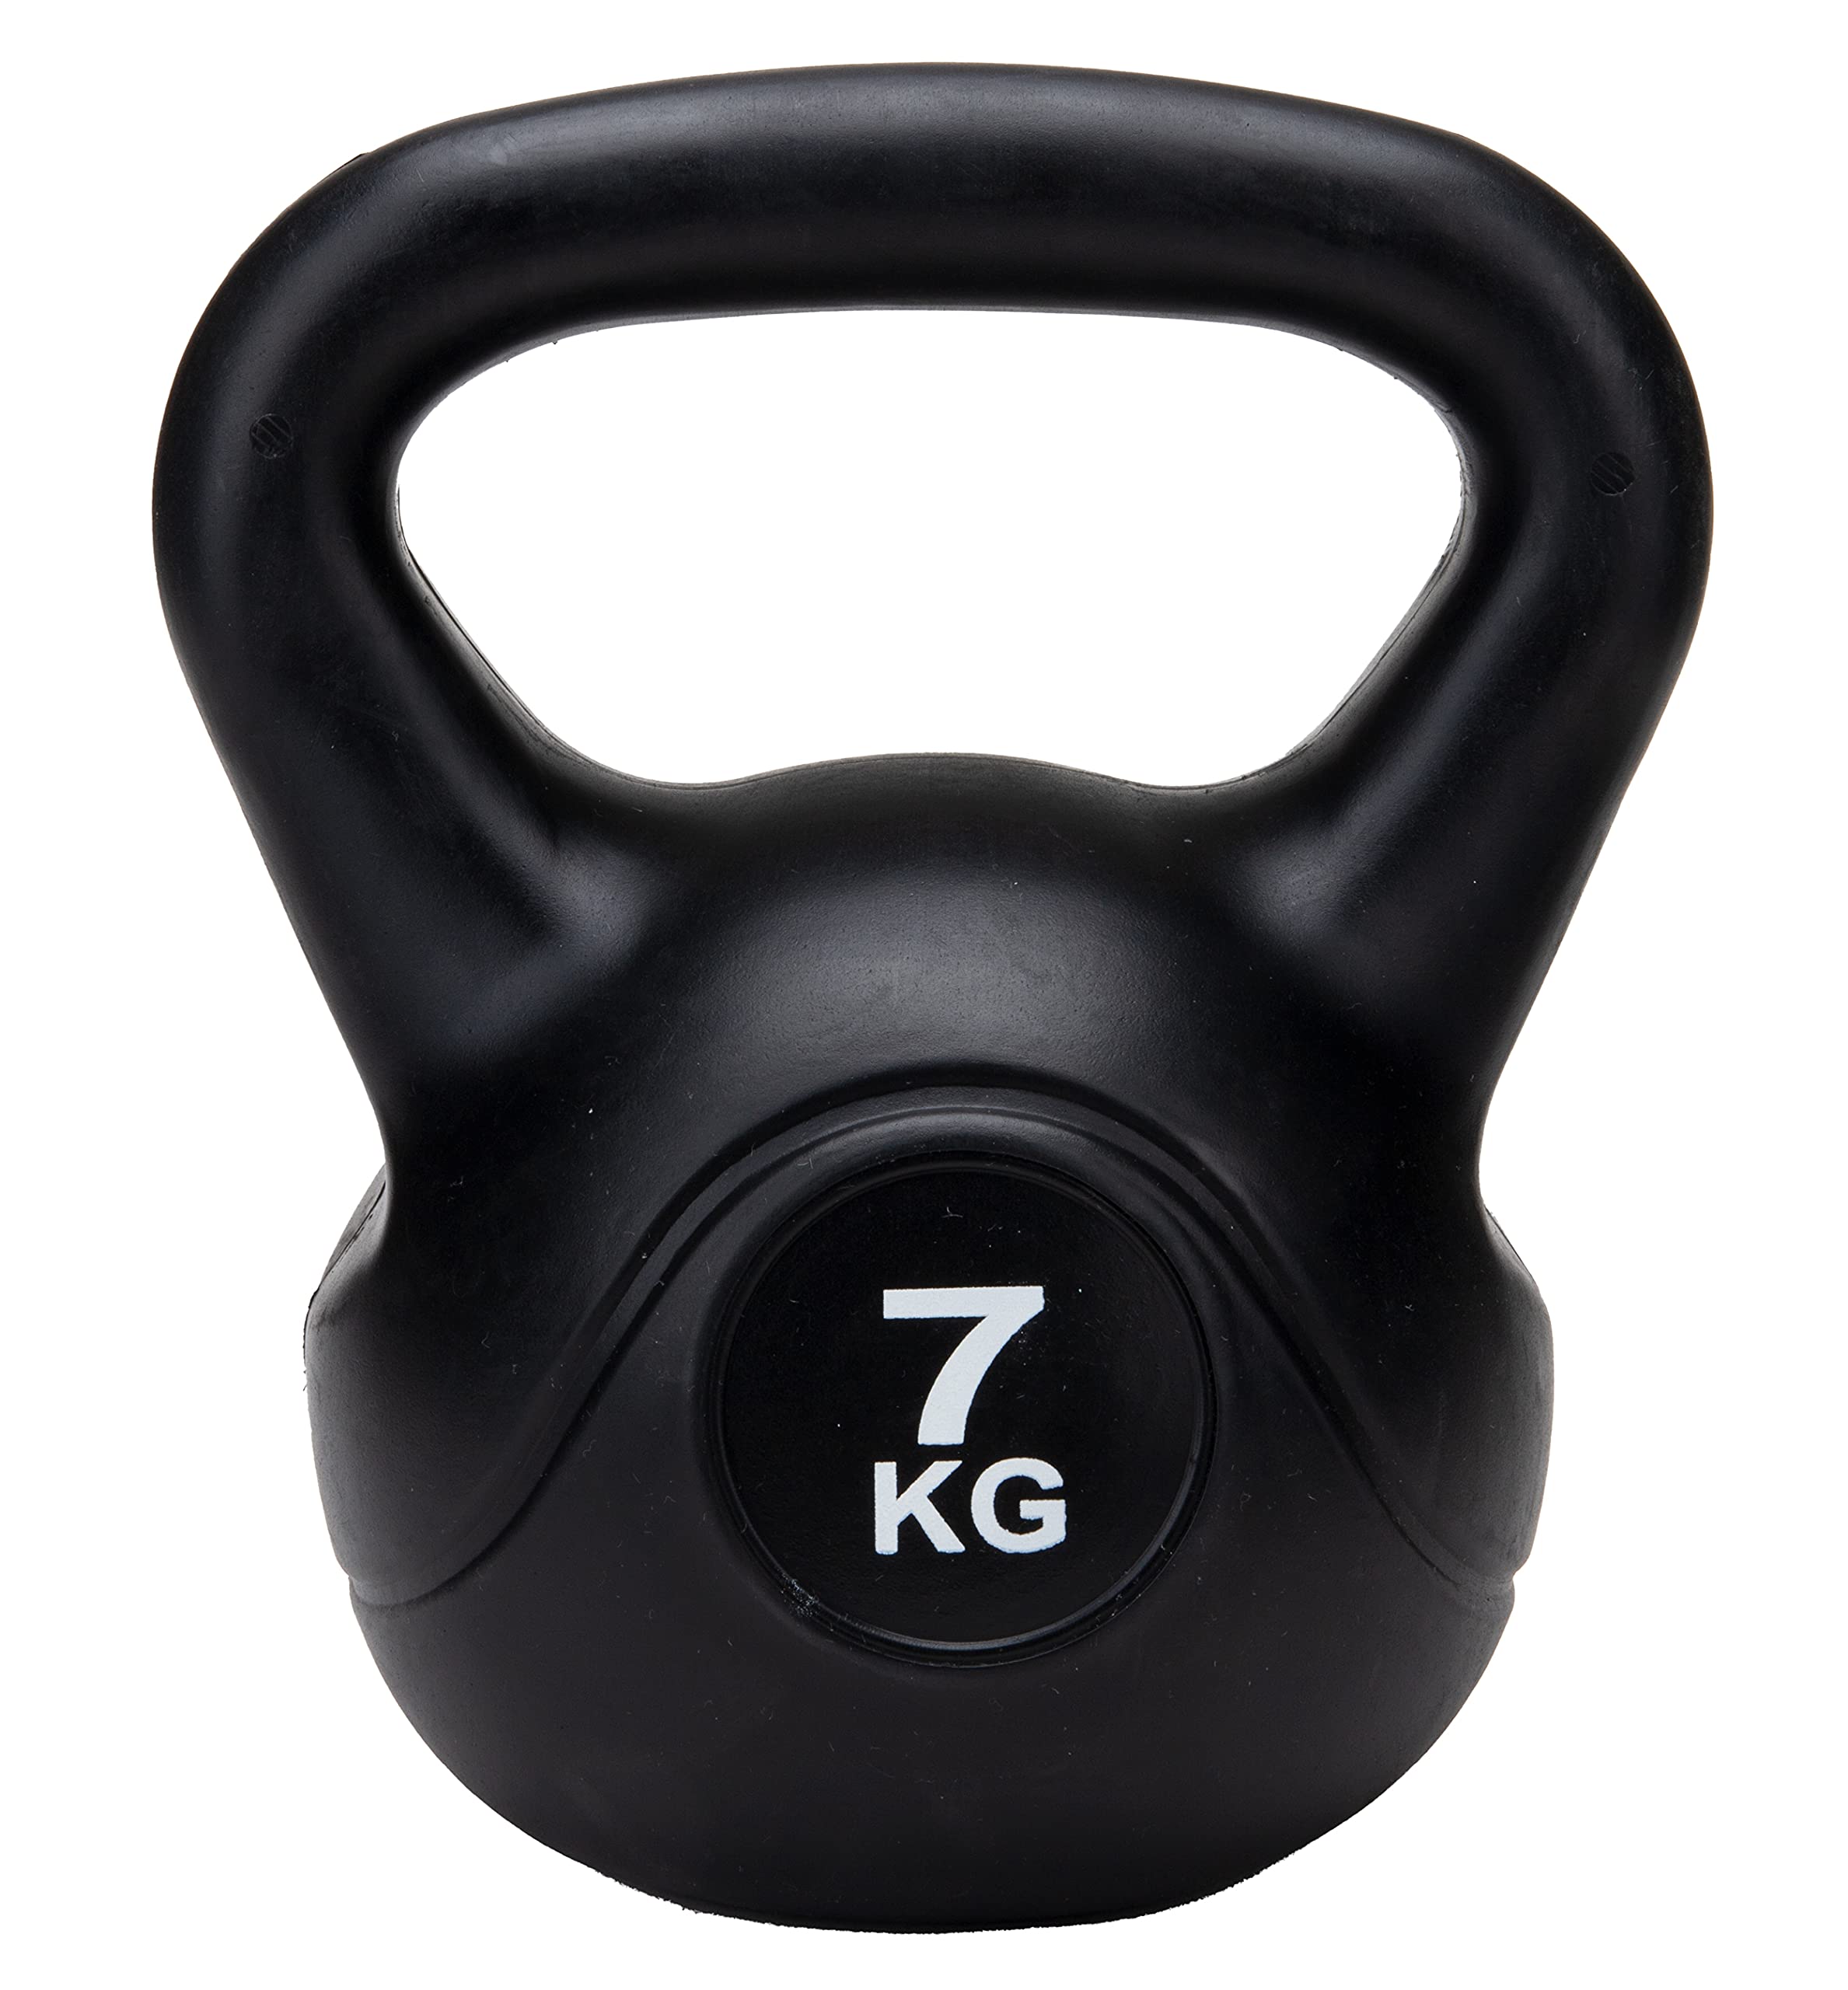 15-Pound Mind Reader Cast Iron Kettlebell (Black, KBELL7KG-BLK) $8 + Free Shipping w/ Prime or on $35+